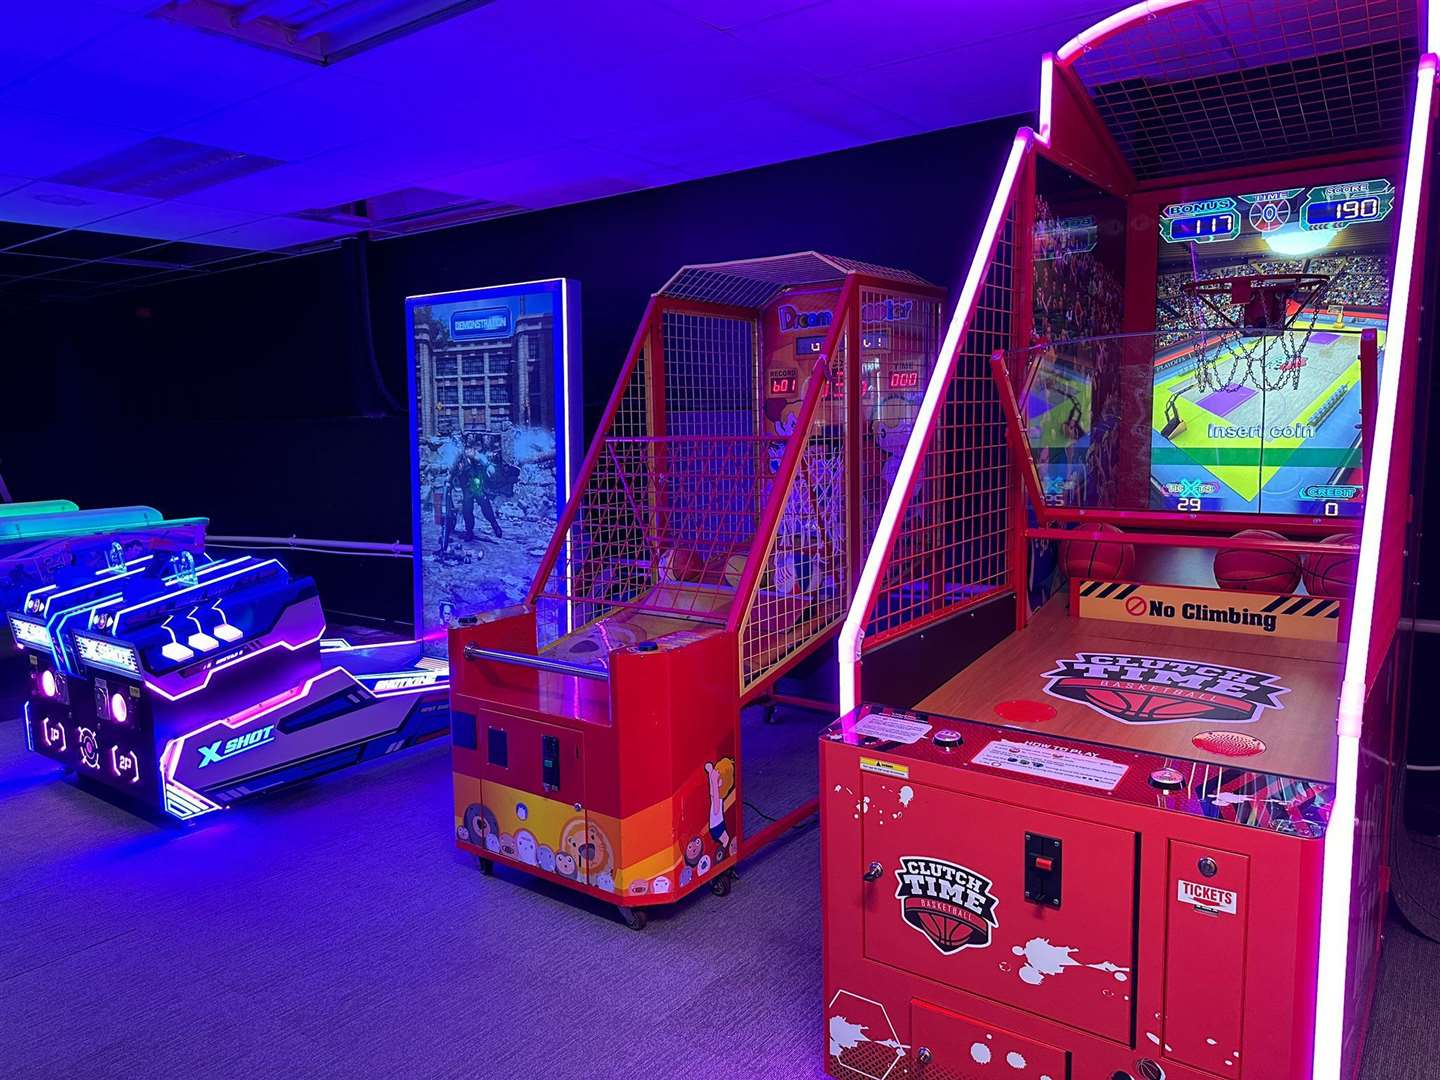 Among the new offerings at the Elev8 in Broadstairs is an arcade where kids can play for free as much as they like during their time slot. Picture: Elev8